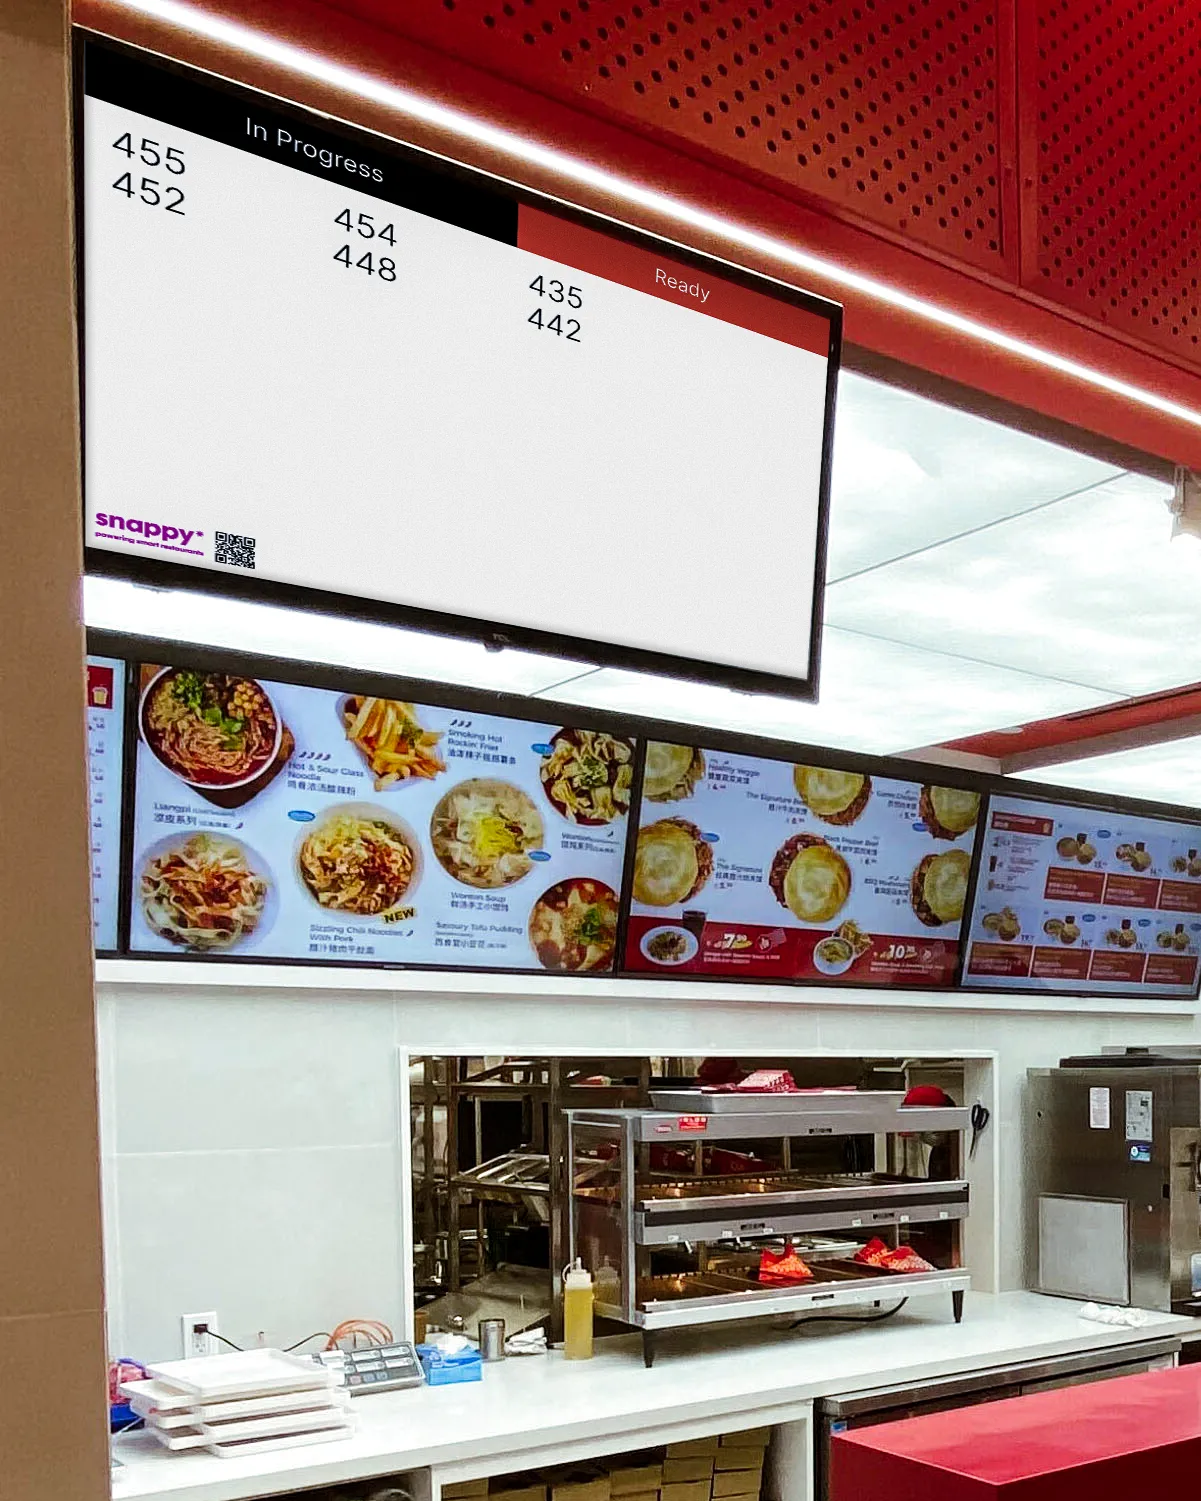 Ordering dashboard at a quick service restaurant